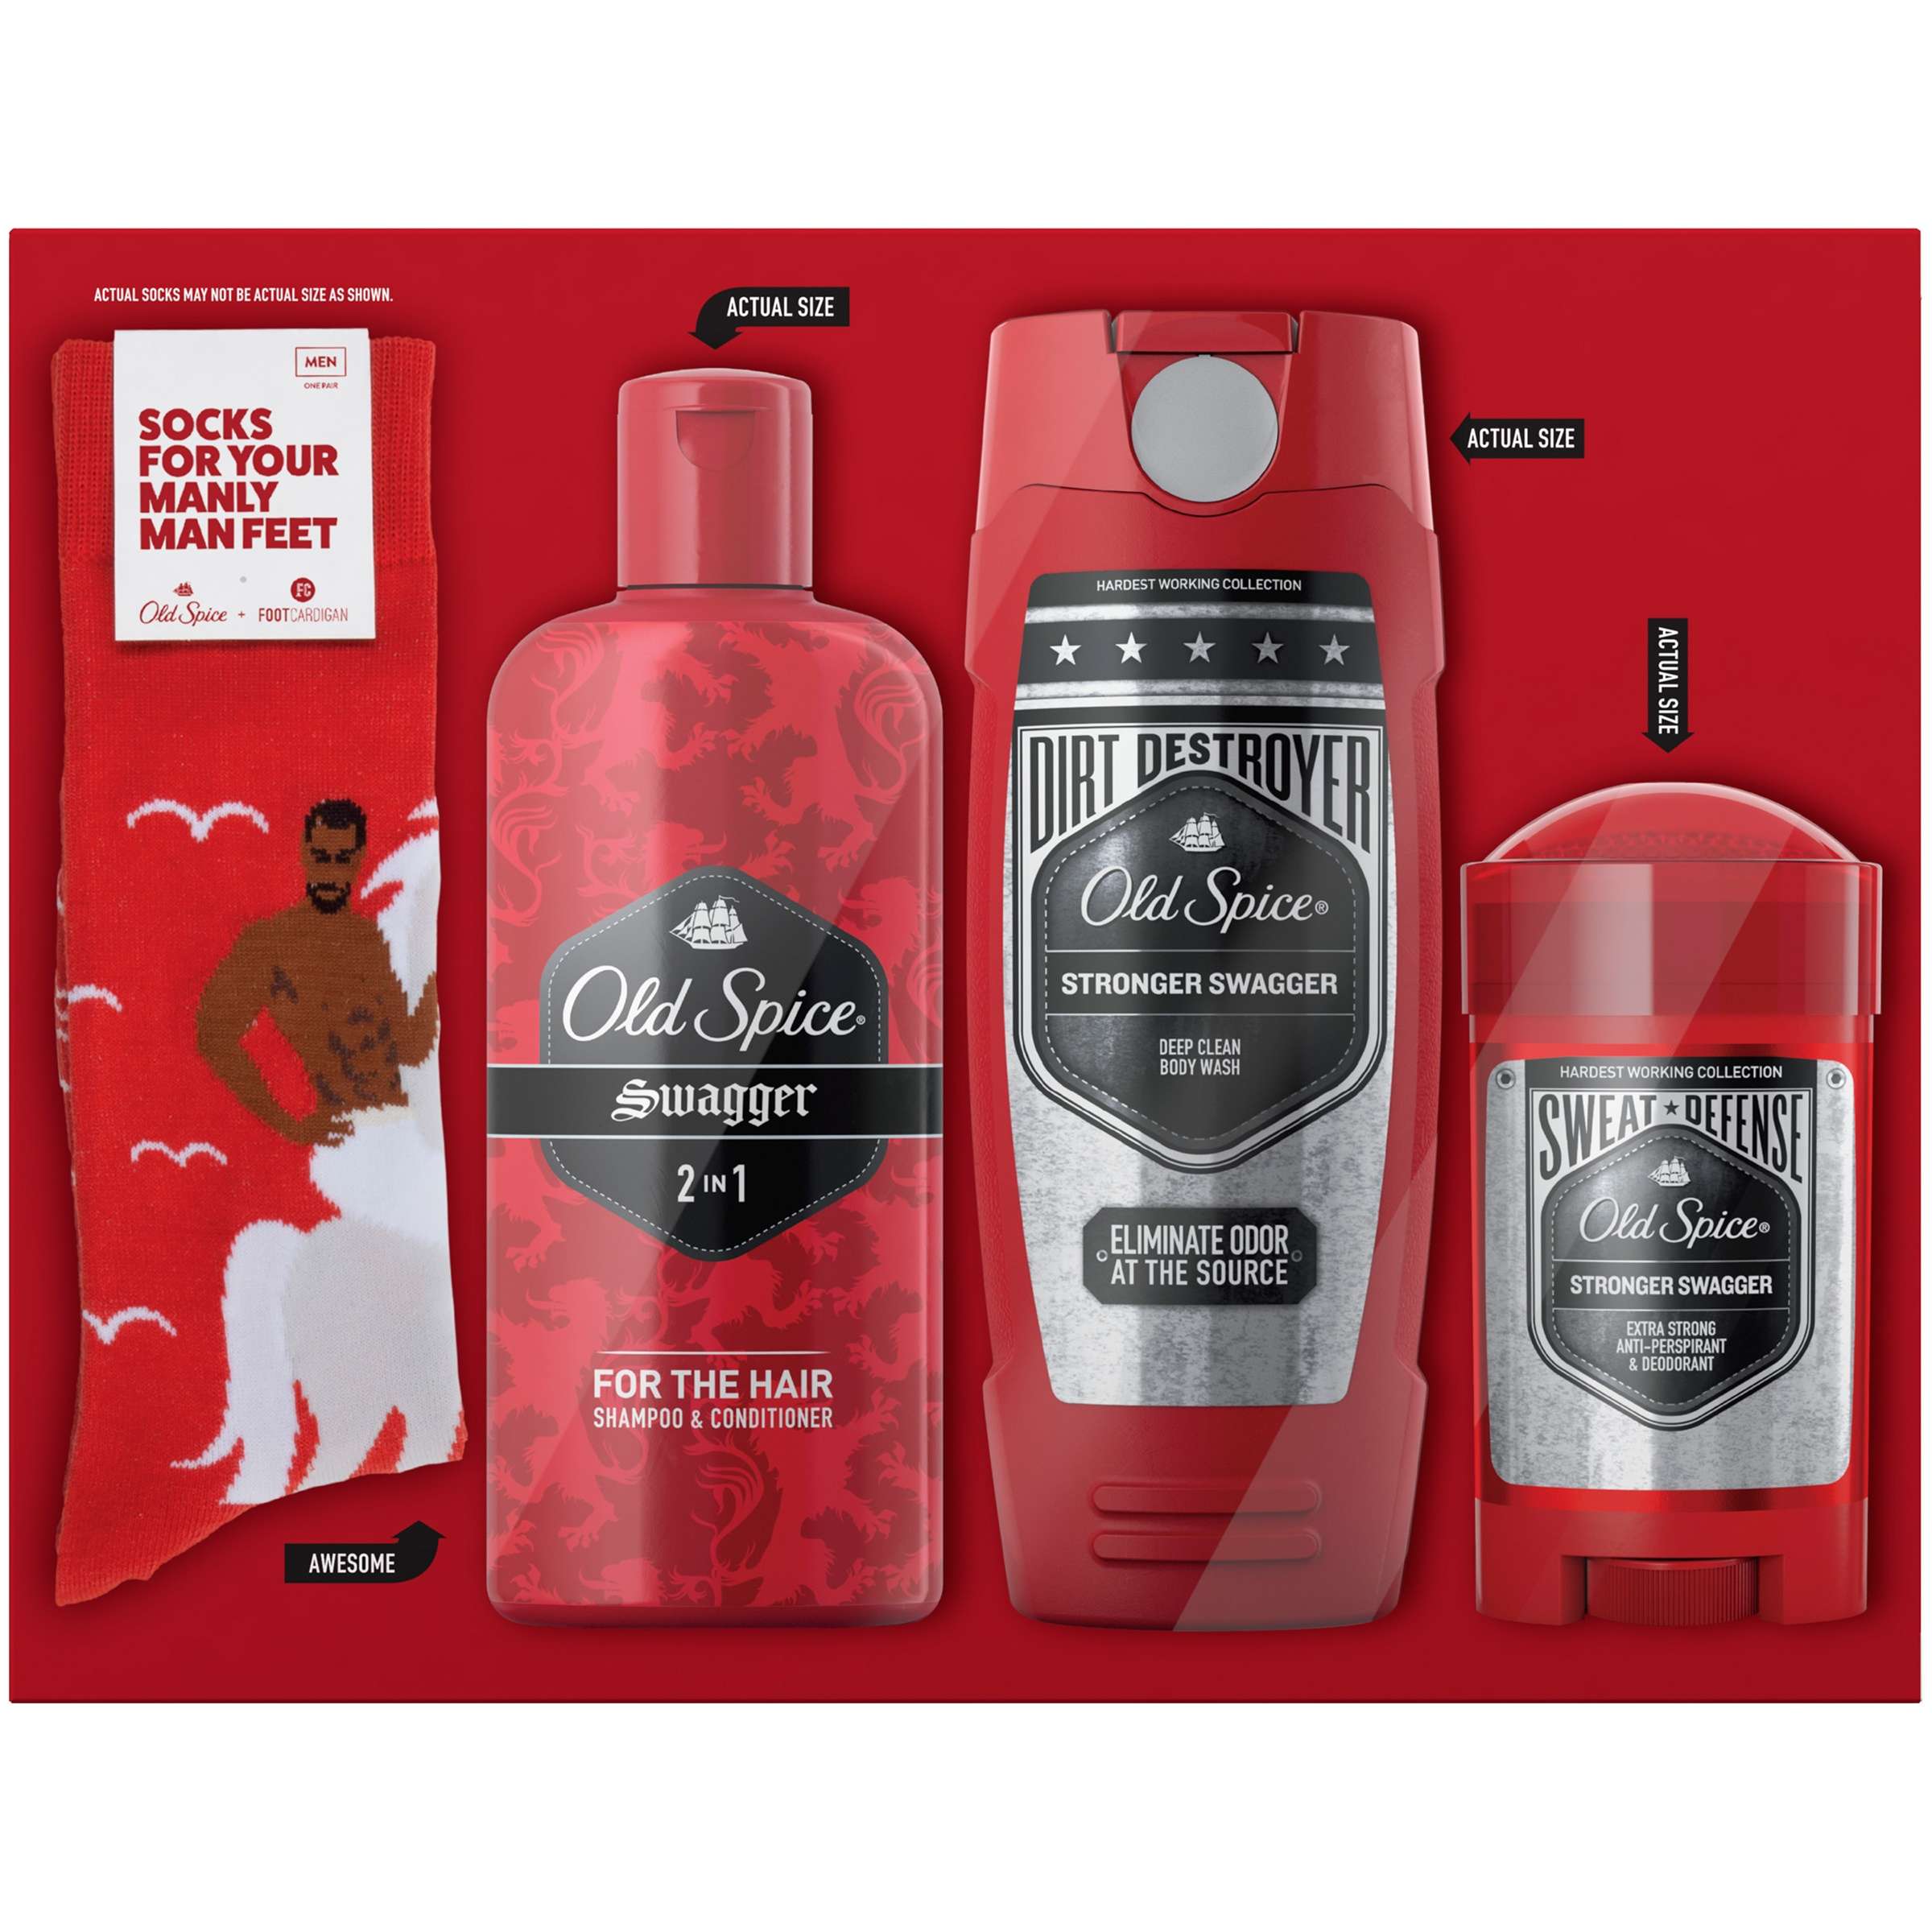 Old Spice Swagger Hardest Working Collection Body Wash, Deodorant and Shampoo & Conditioner Gift of Confidence Gift Pack (Free Socks Included) - image 5 of 6